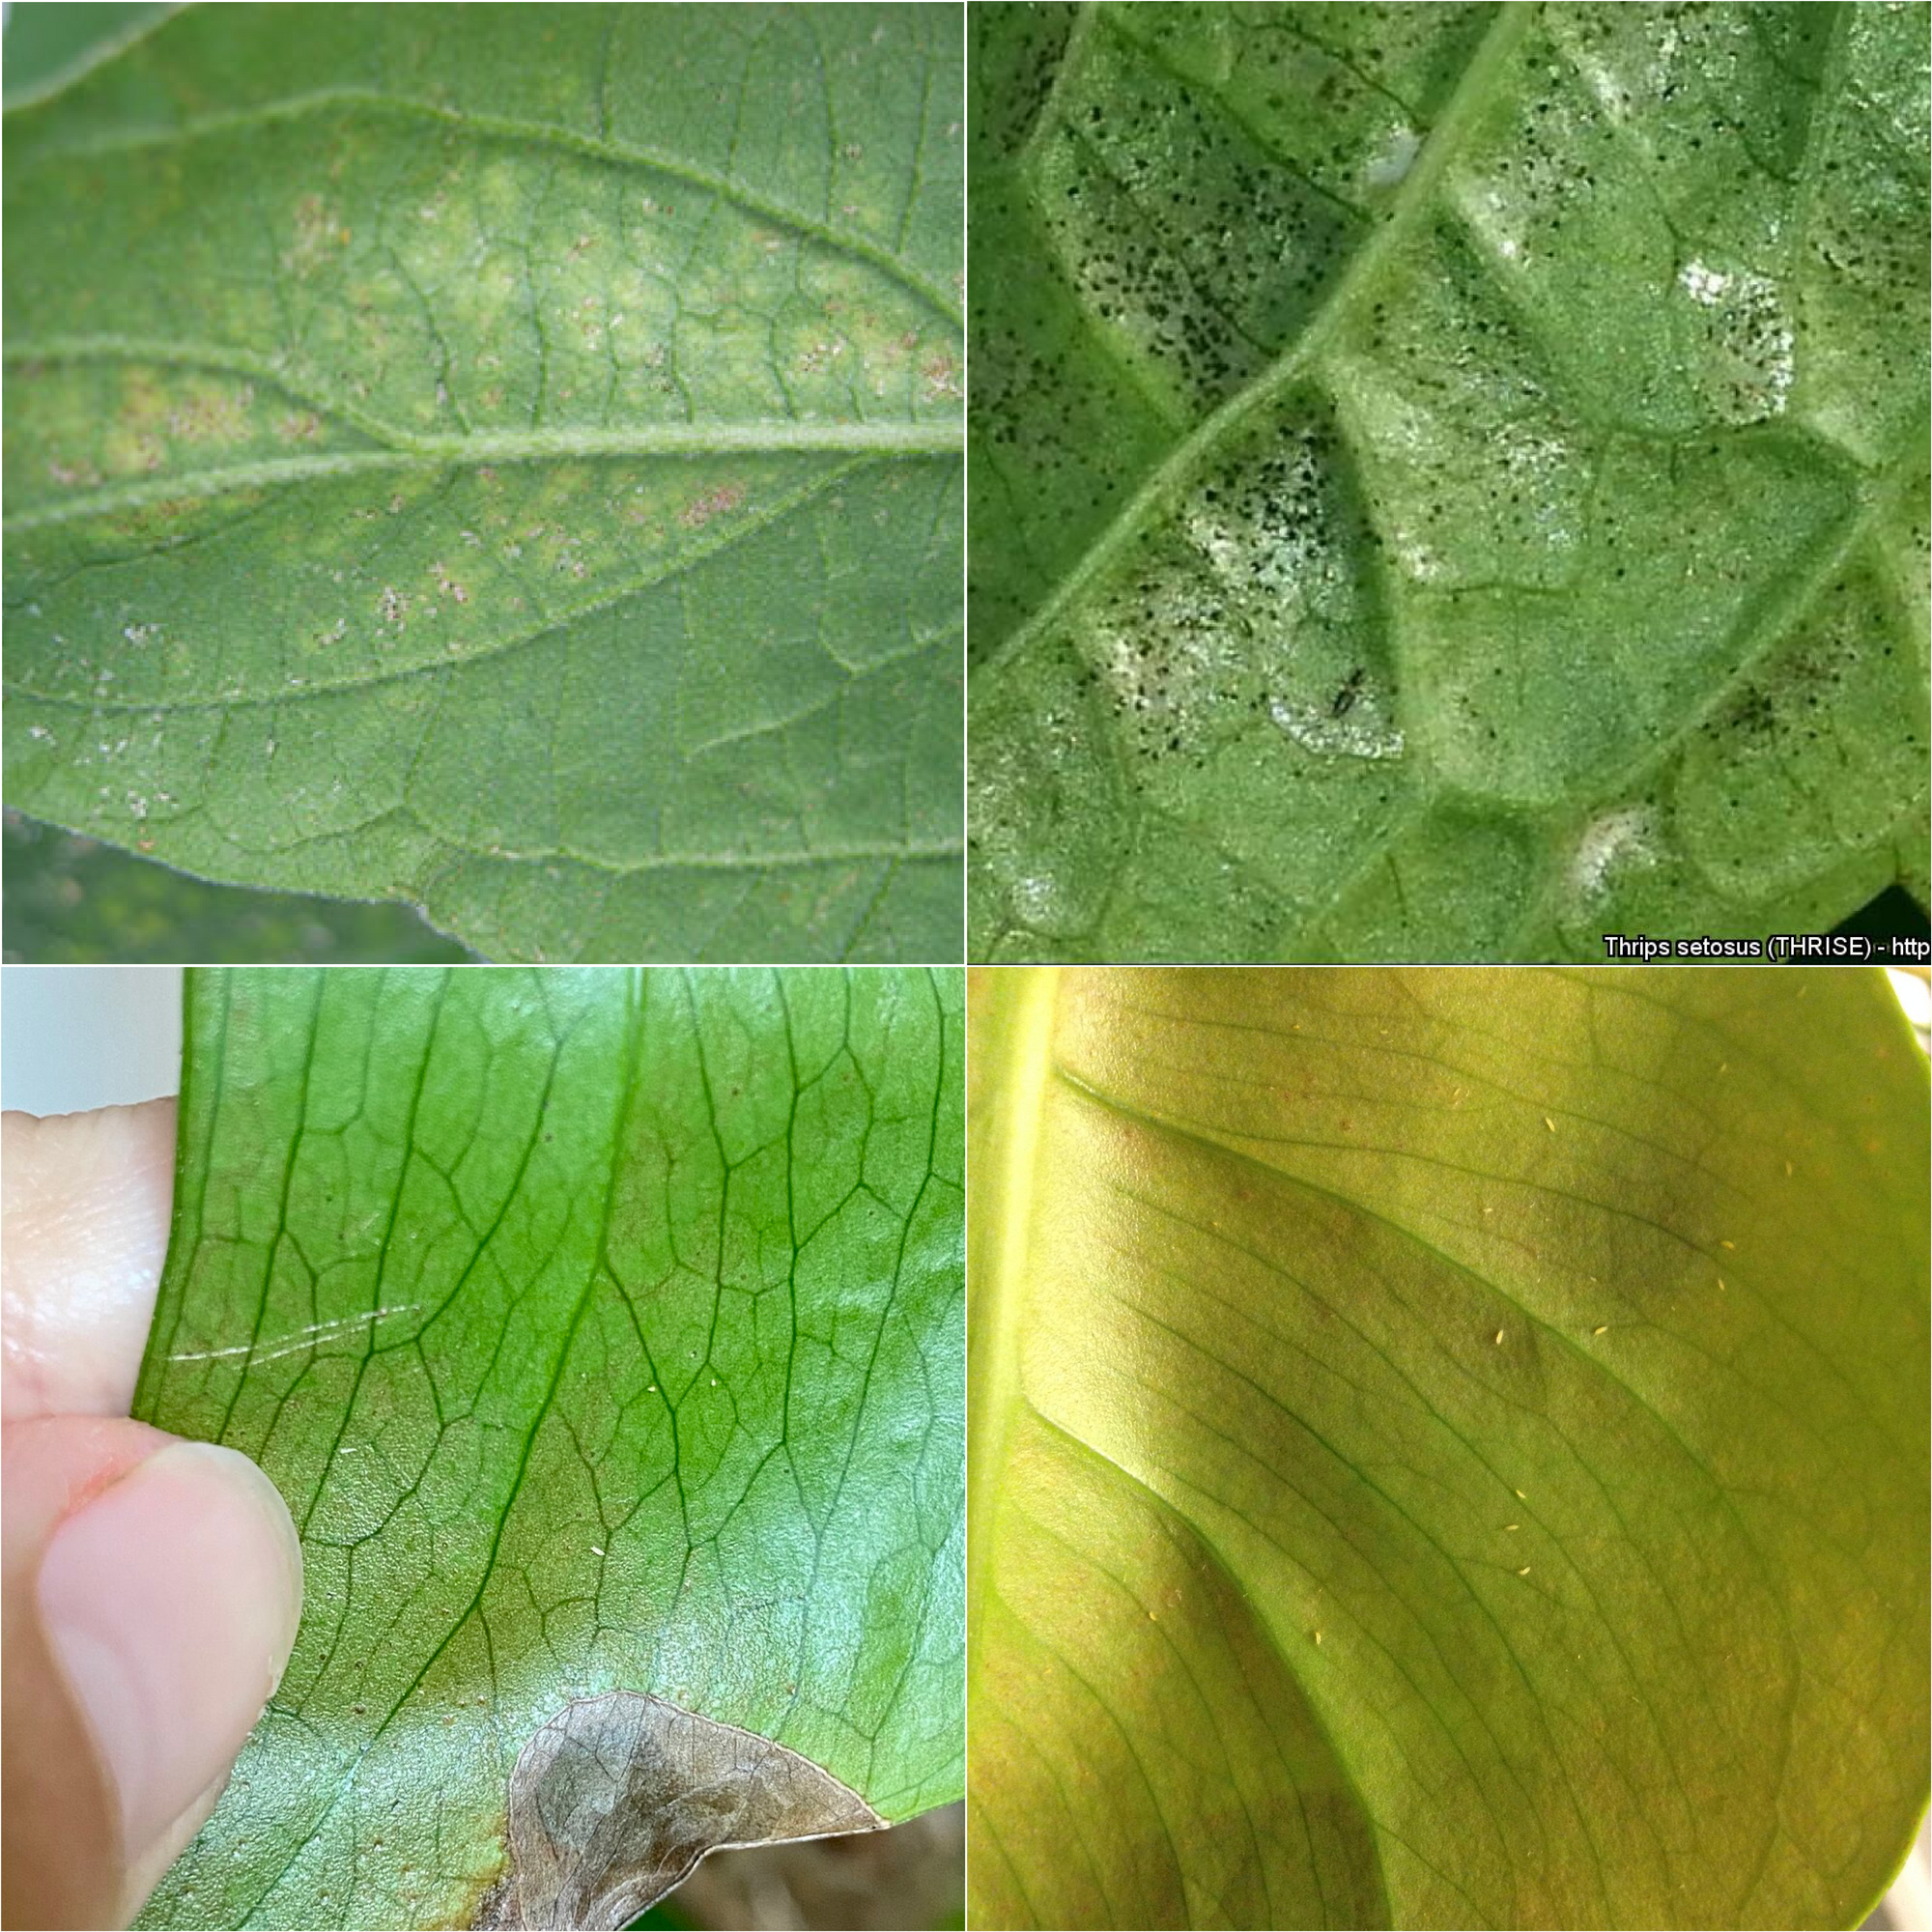 How to get rid of thrips [CAN]